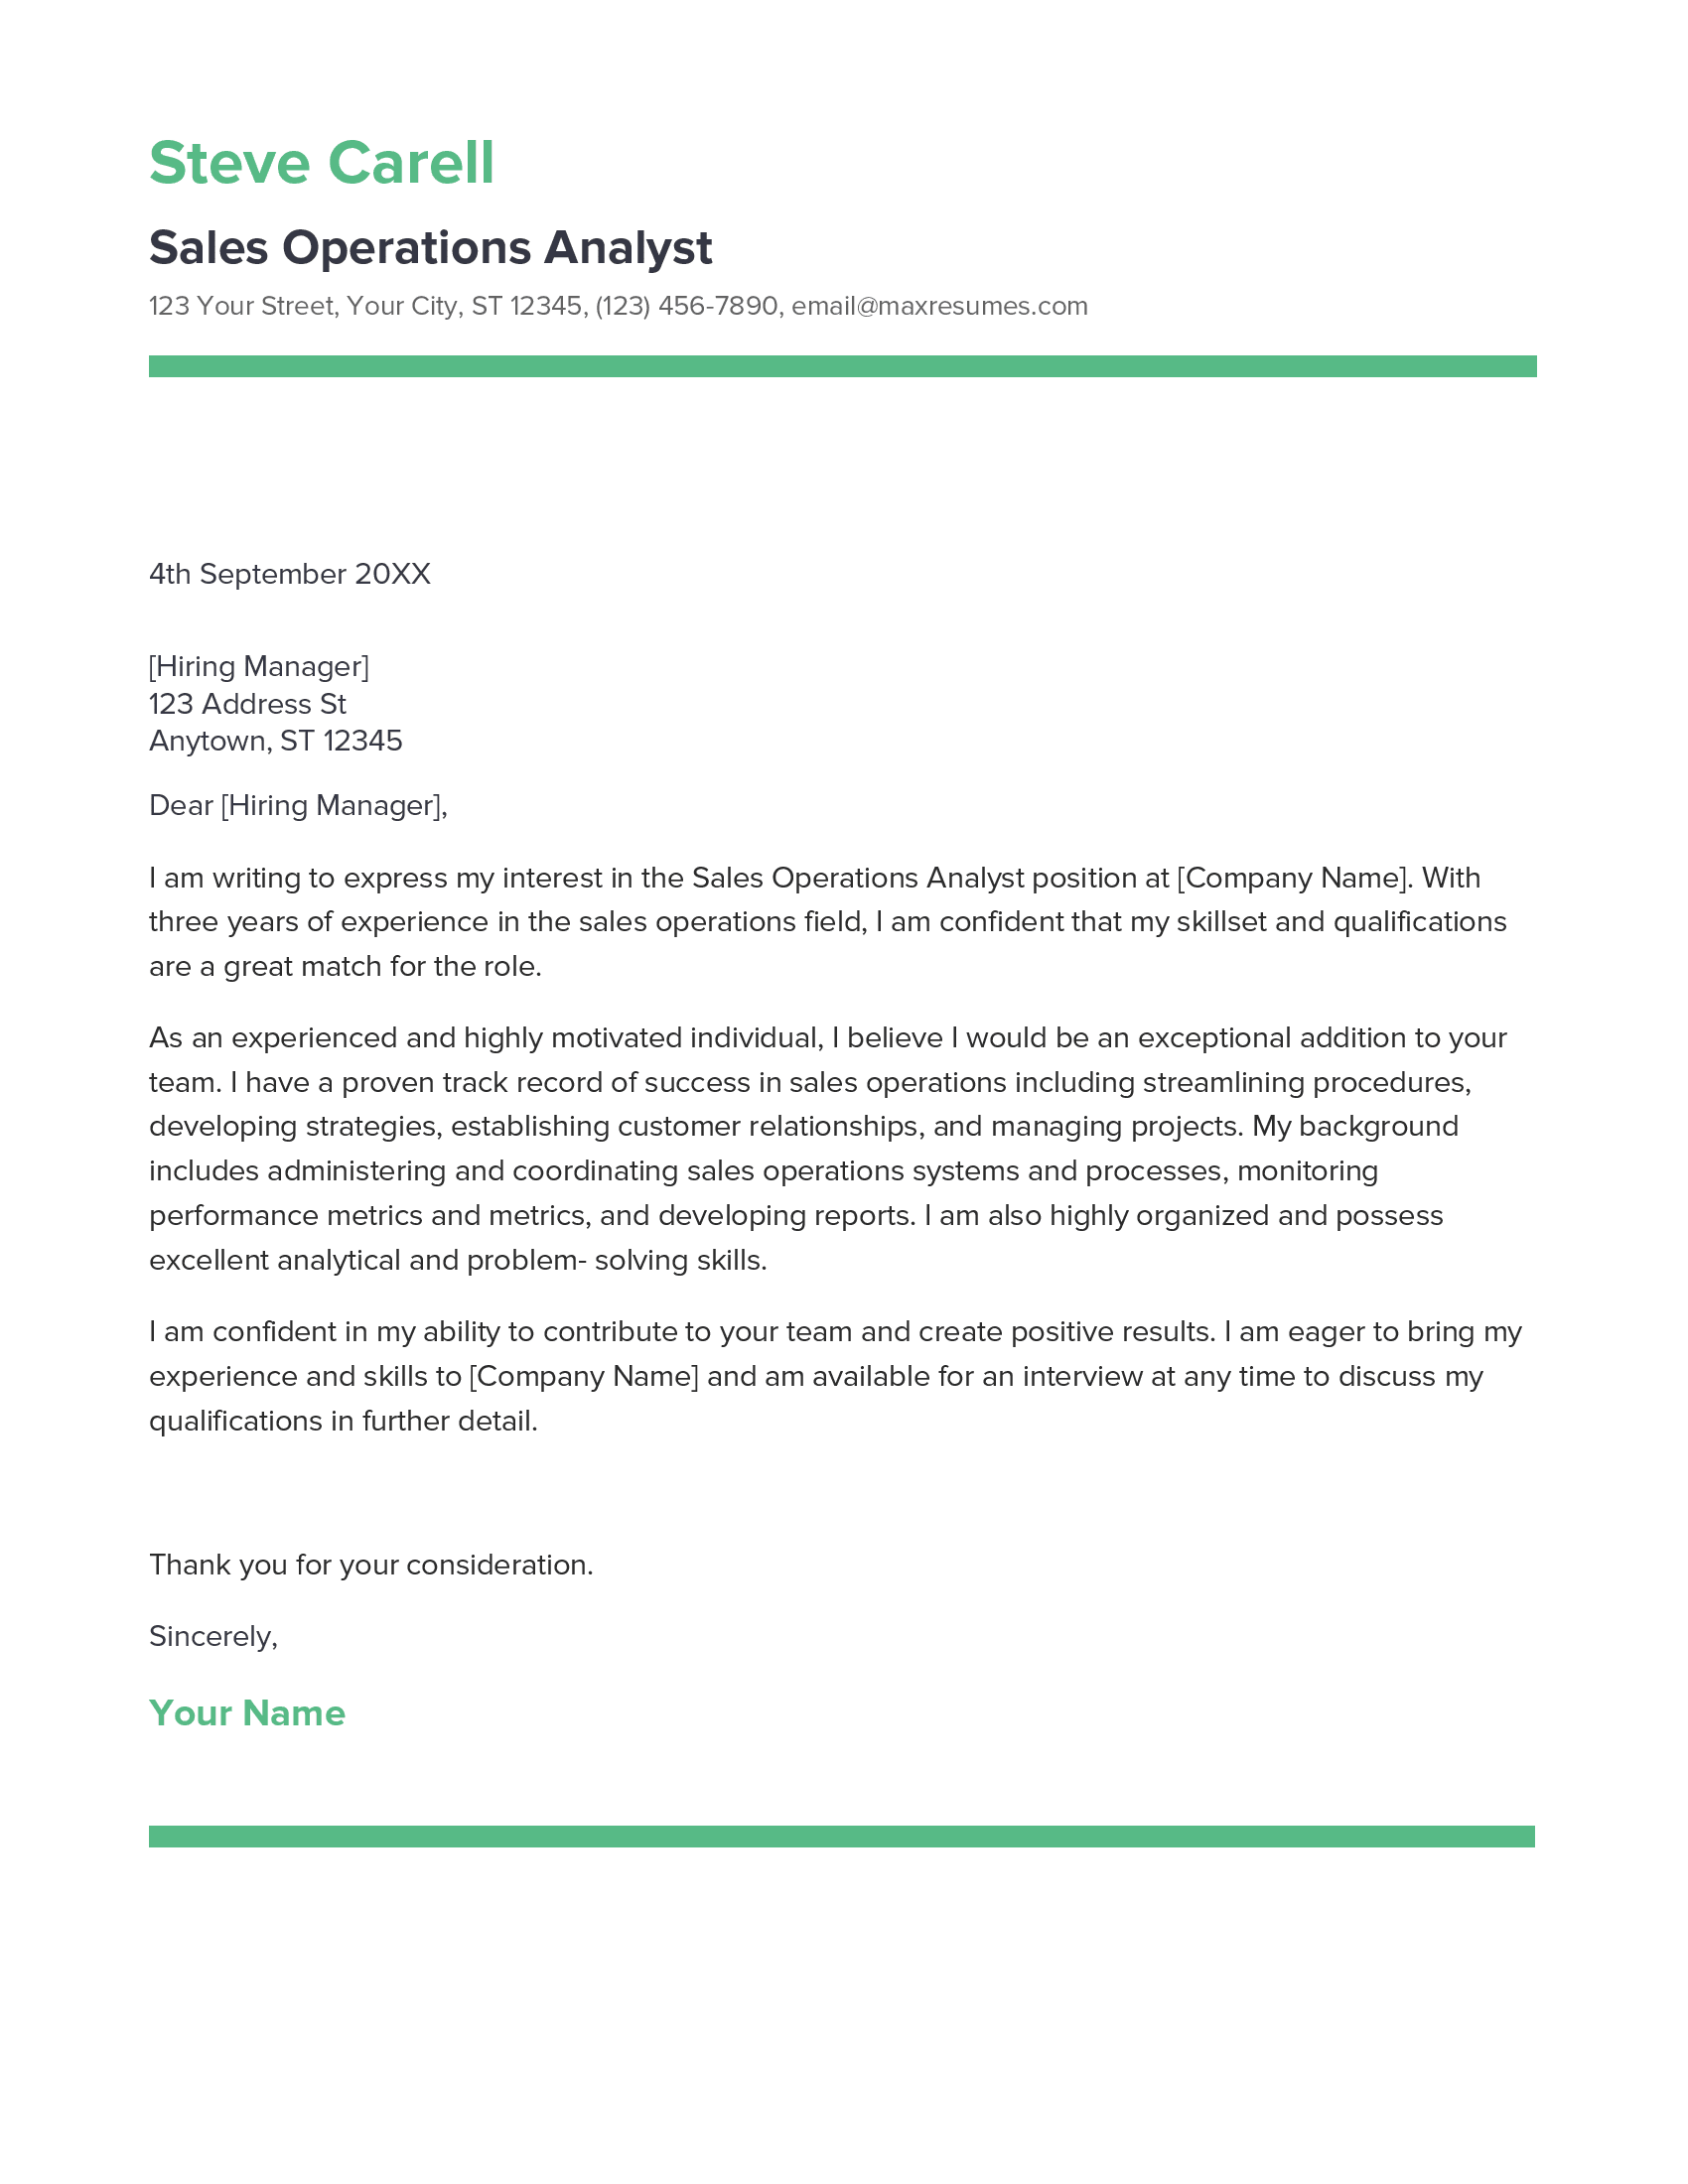 Sales Operations Analyst Cover Letter Example